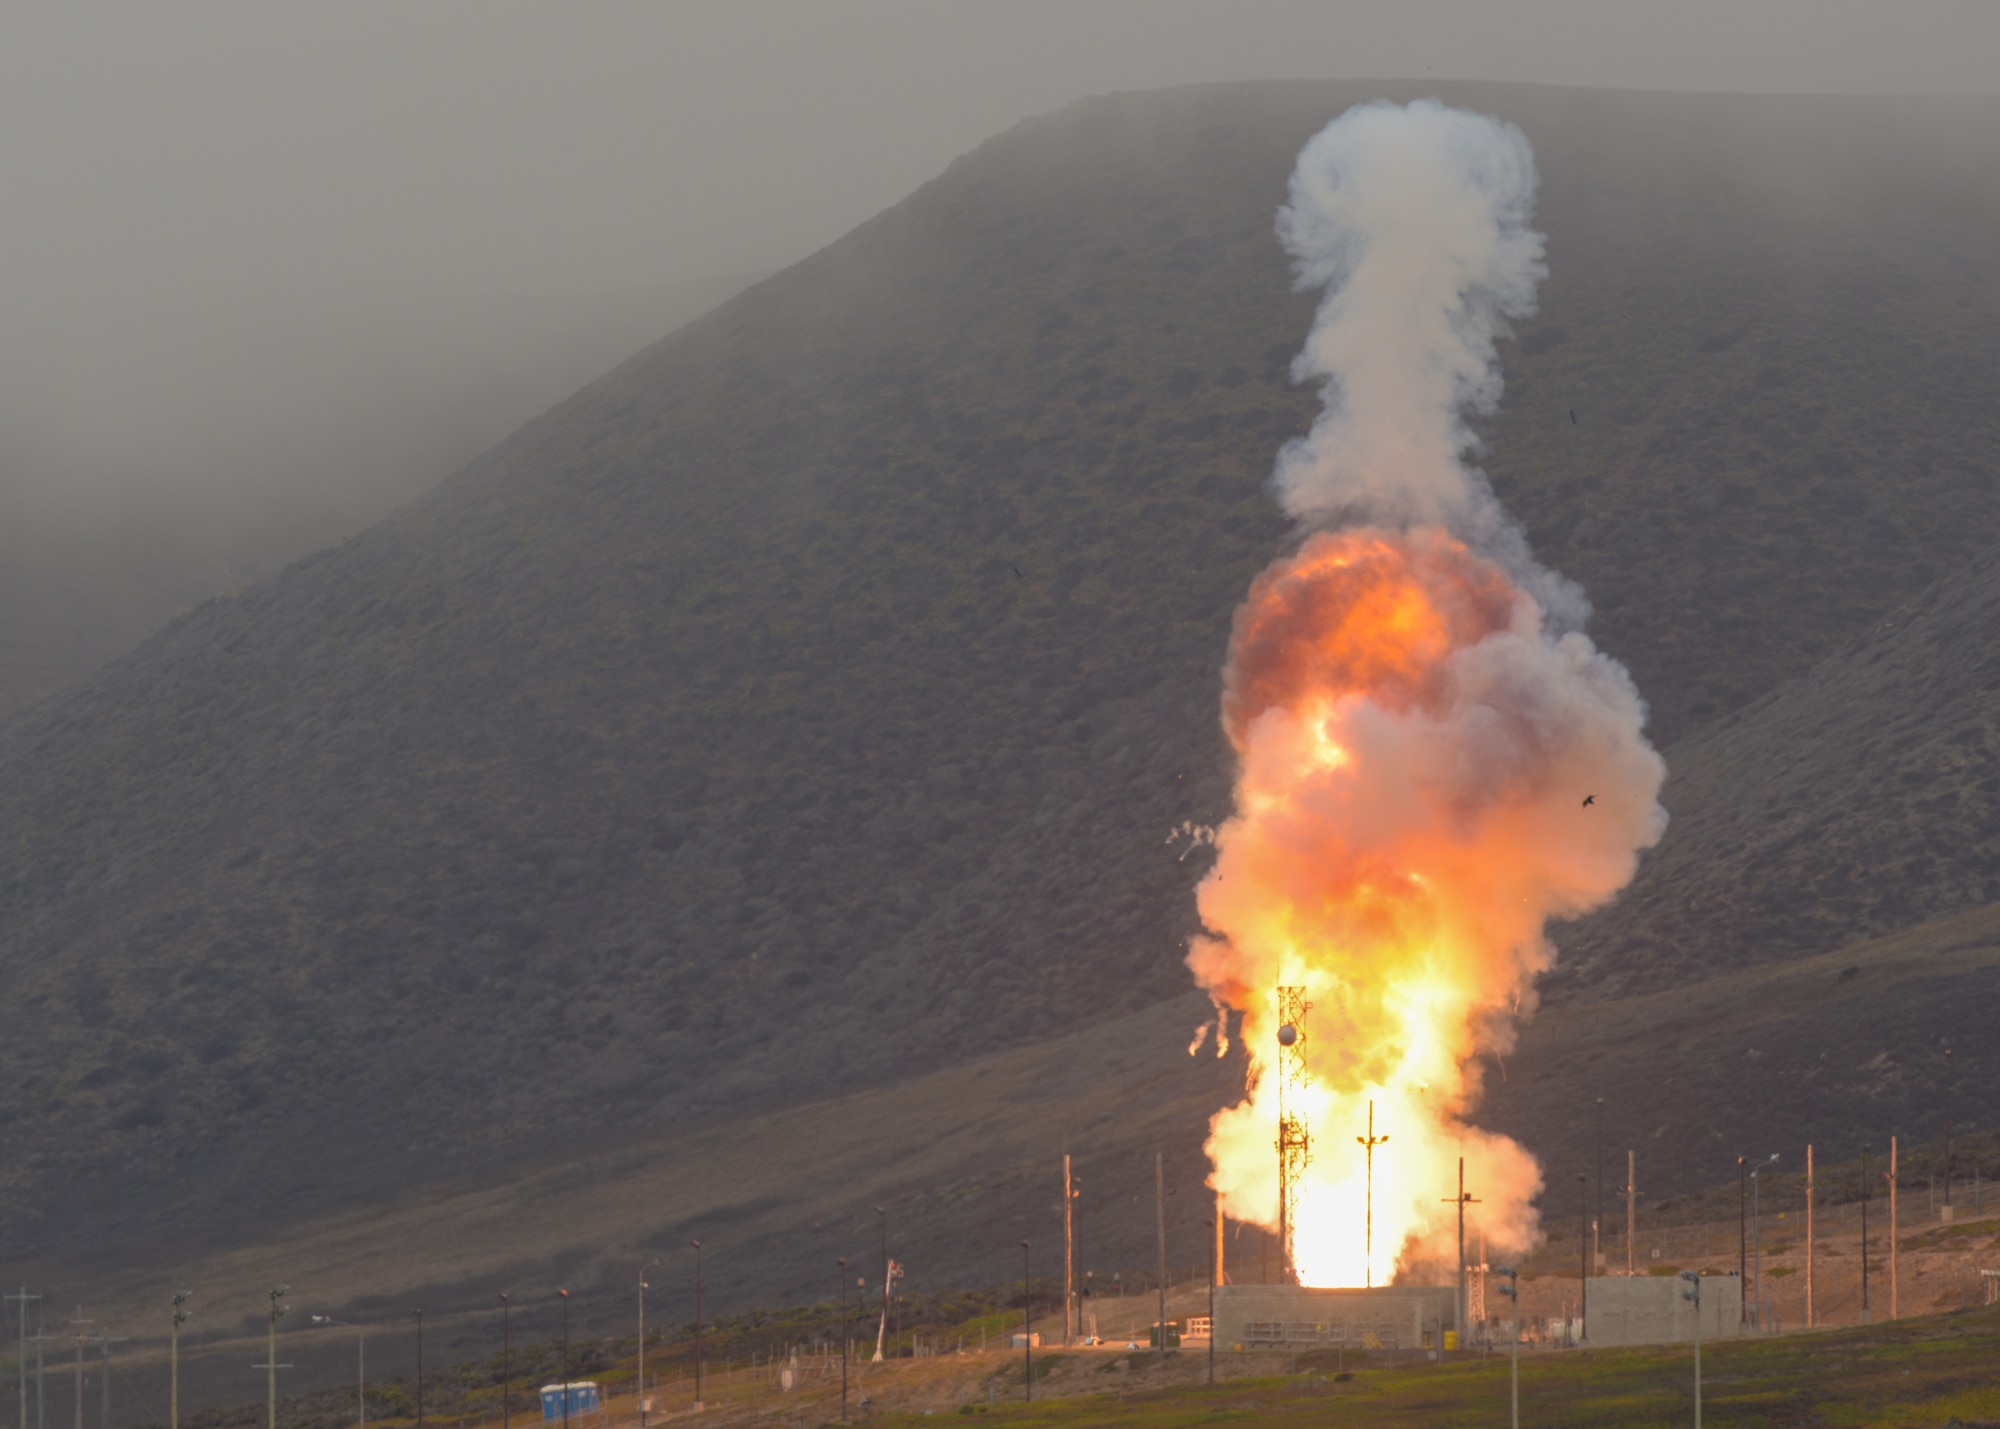 A Ground-based Interceptor missile, an element of the nation’s Ground-based Midcourse Defense system, was launched from North Vandenberg today at 10:30 a.m. Pacific Time by Space Launch Delta 30 officials, the U.S. Missile Defense Agency, and U.S. Northern Command.